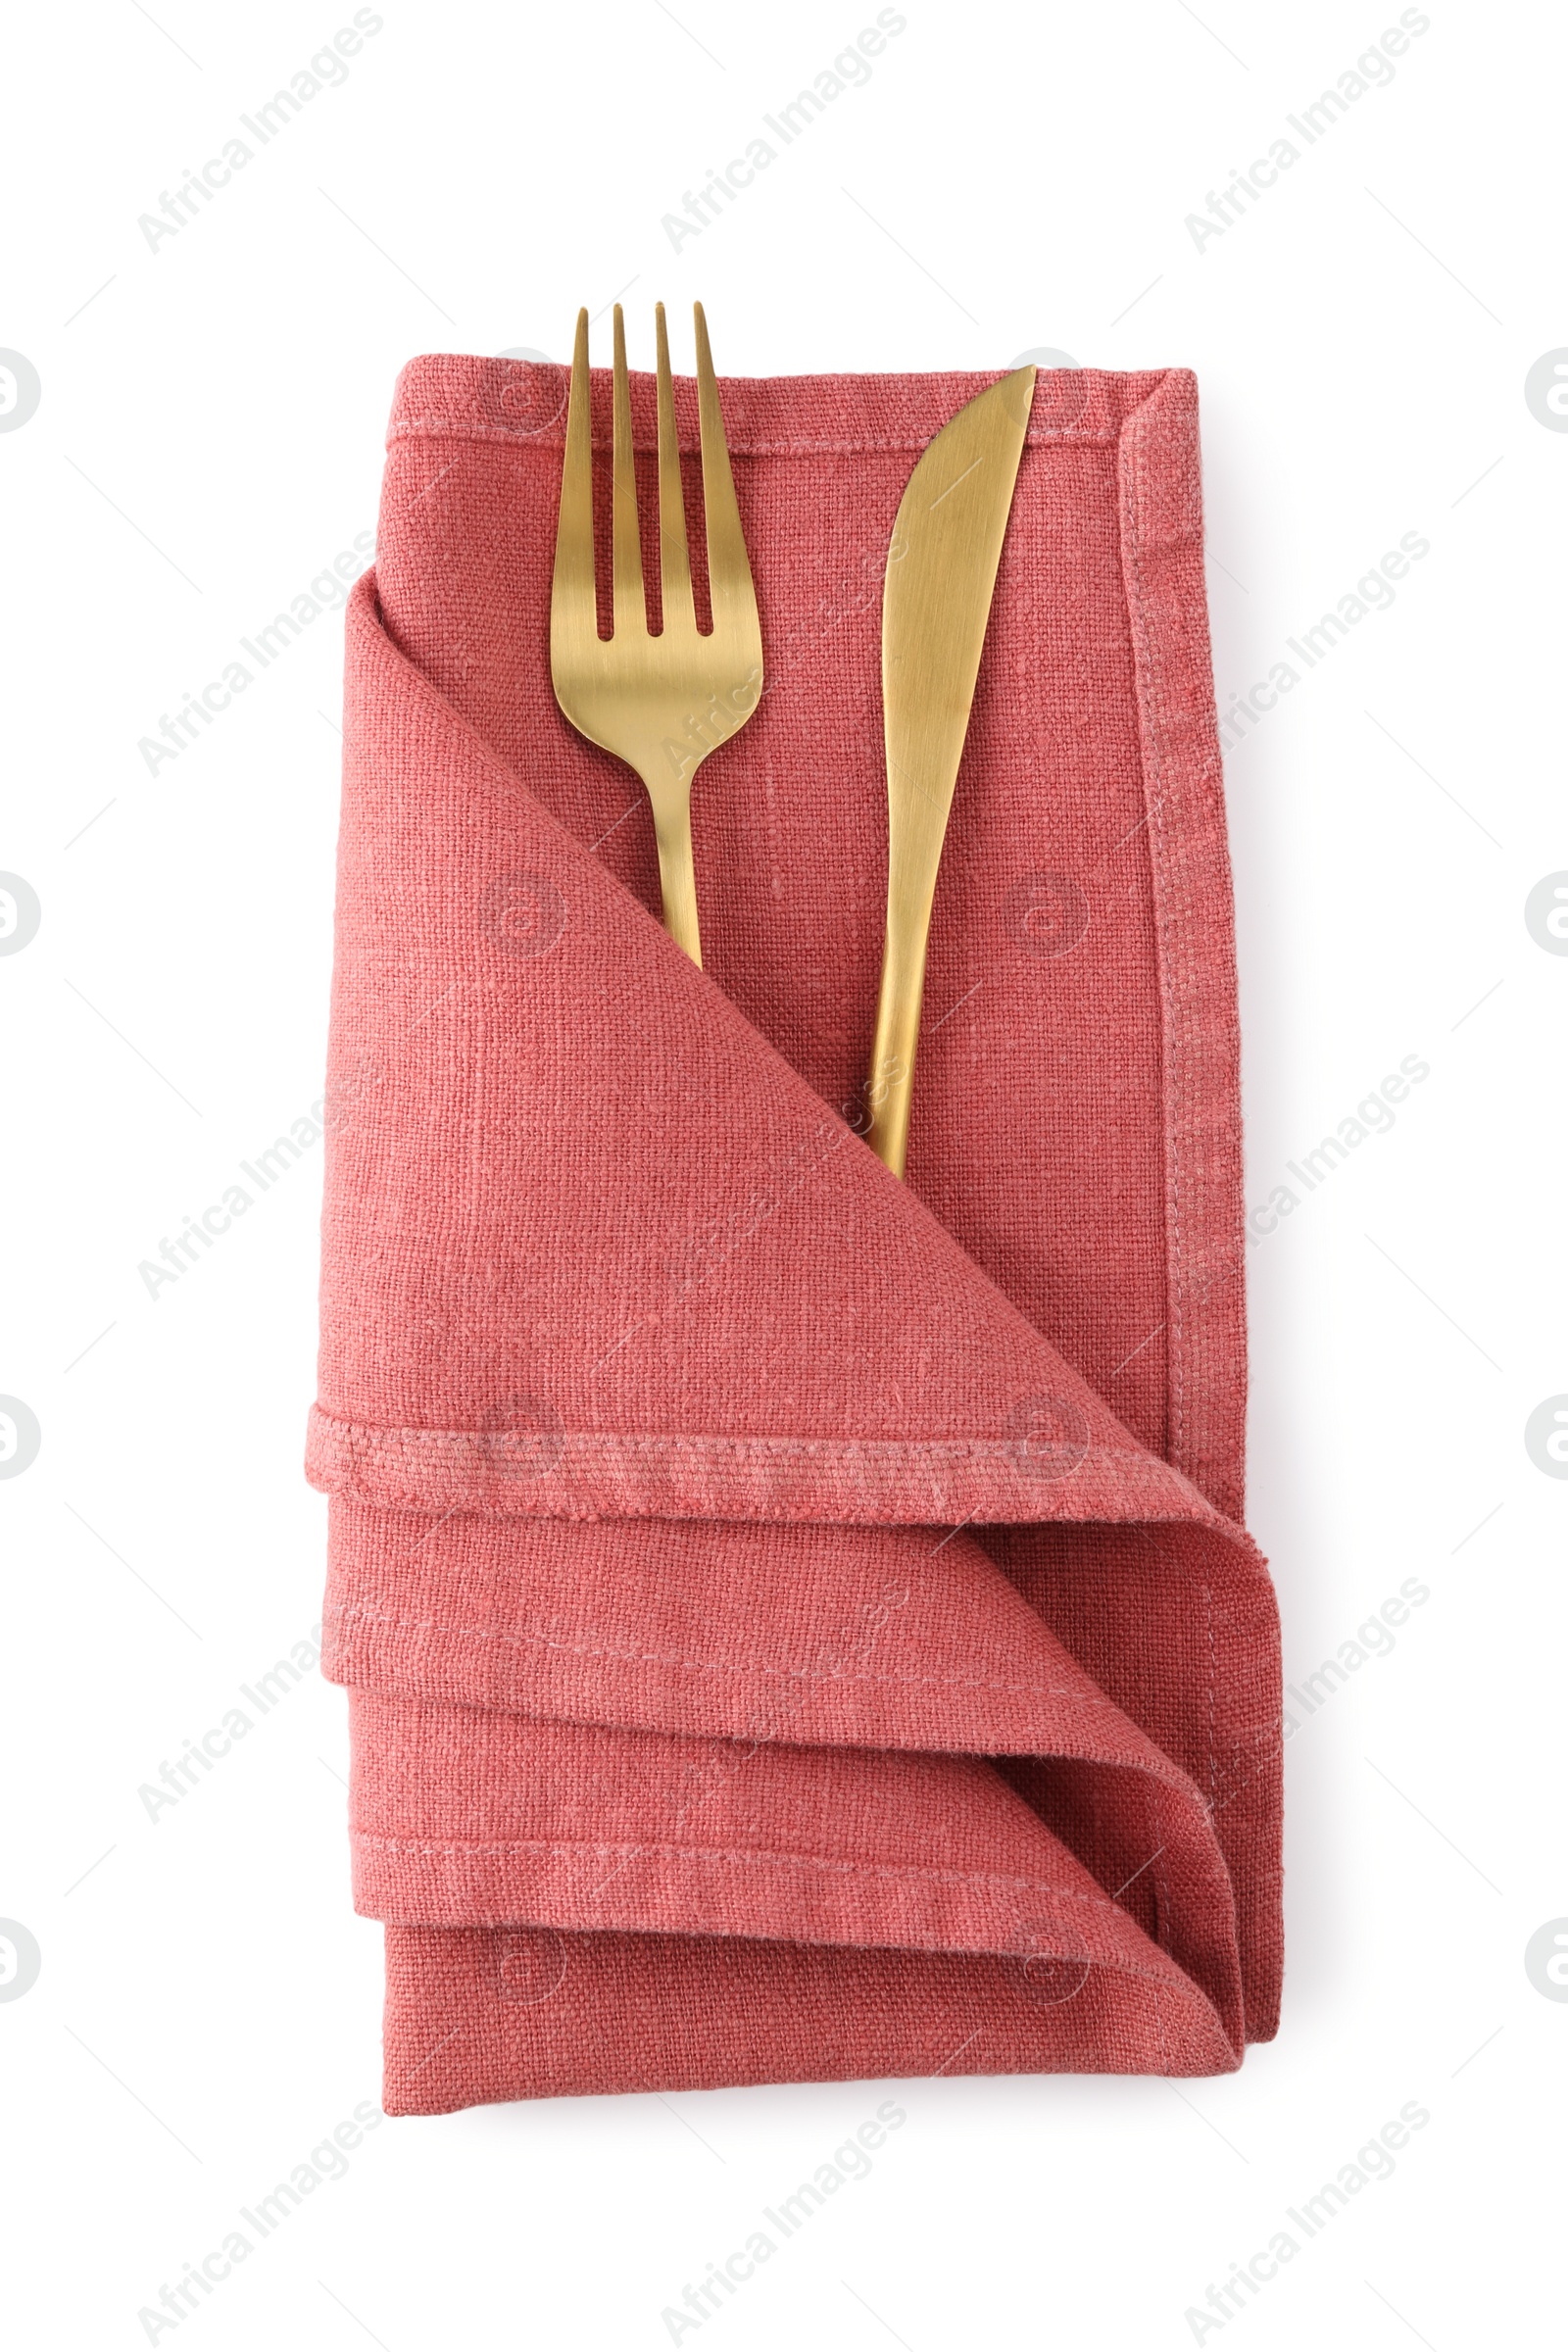 Photo of Red napkin with golden fork and knife isolated on white, top view. Cutlery set